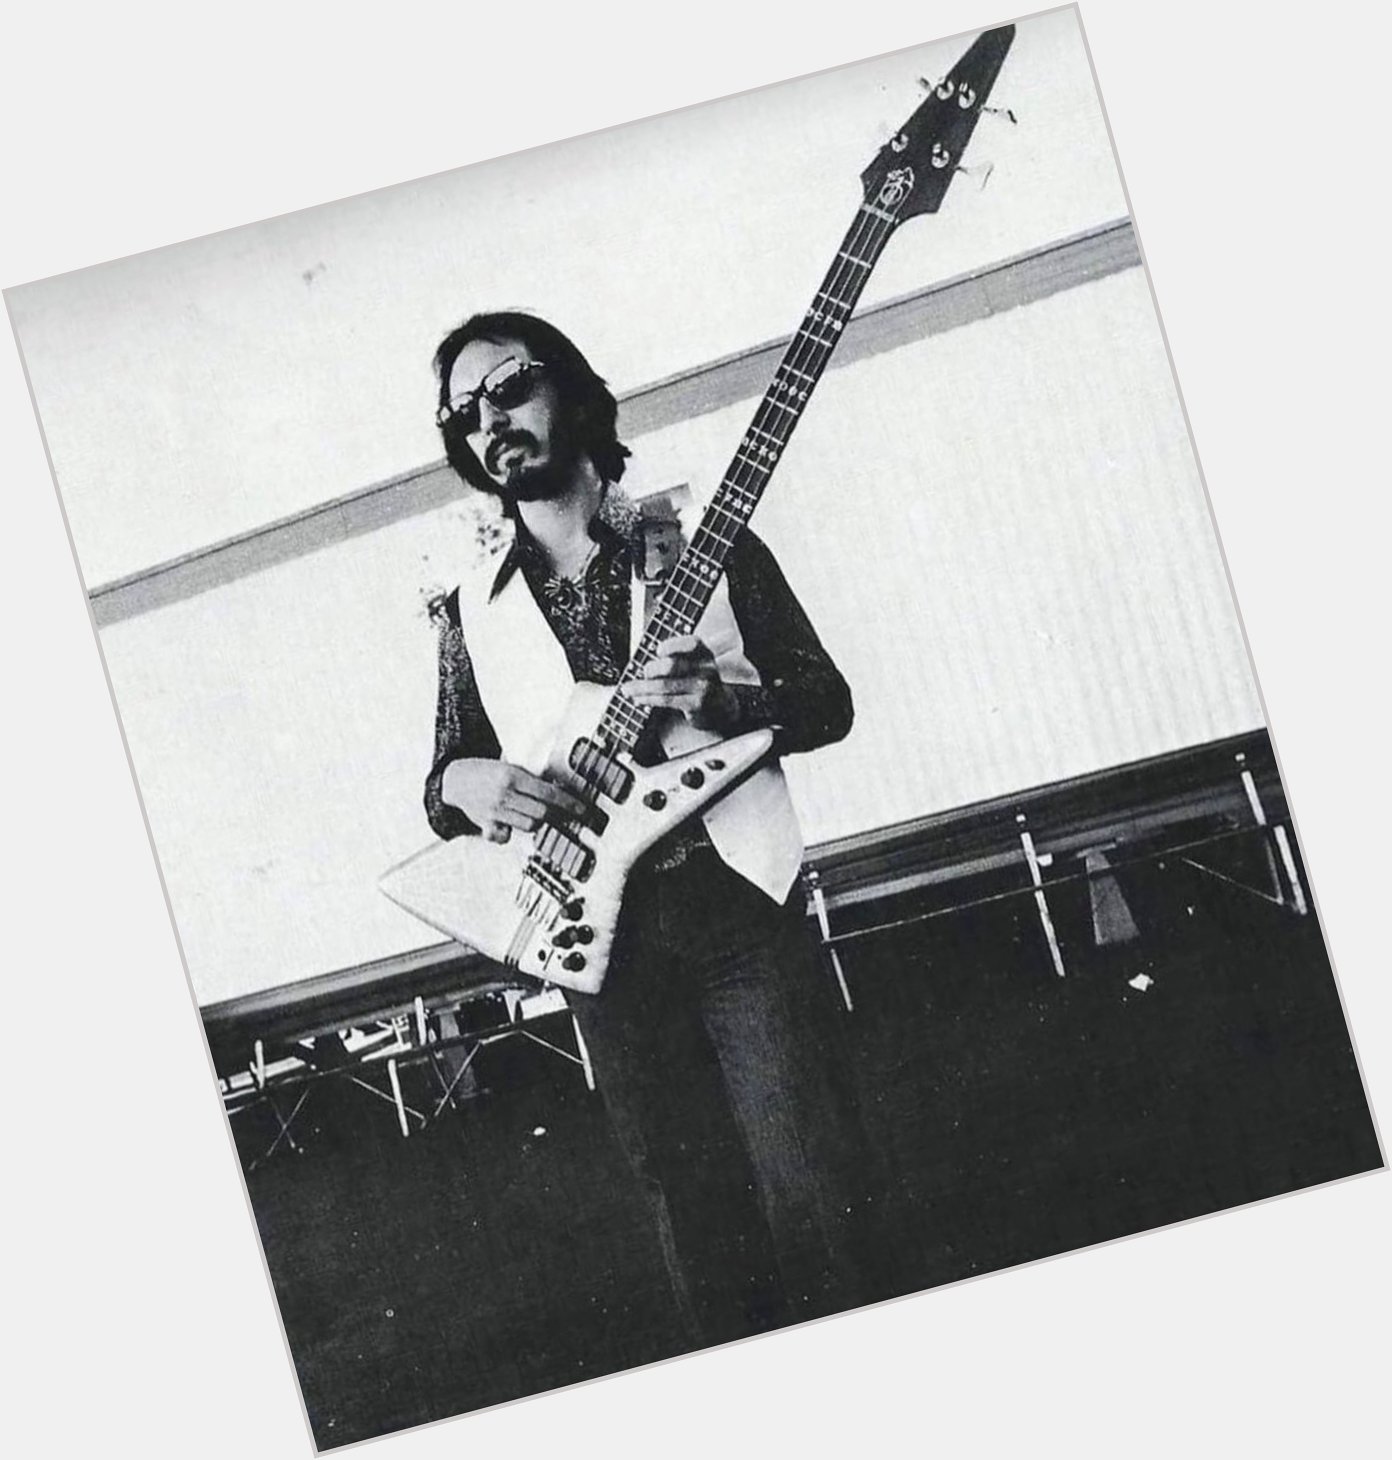 Happy Birthday John Entwistle, bass player of The Who. 